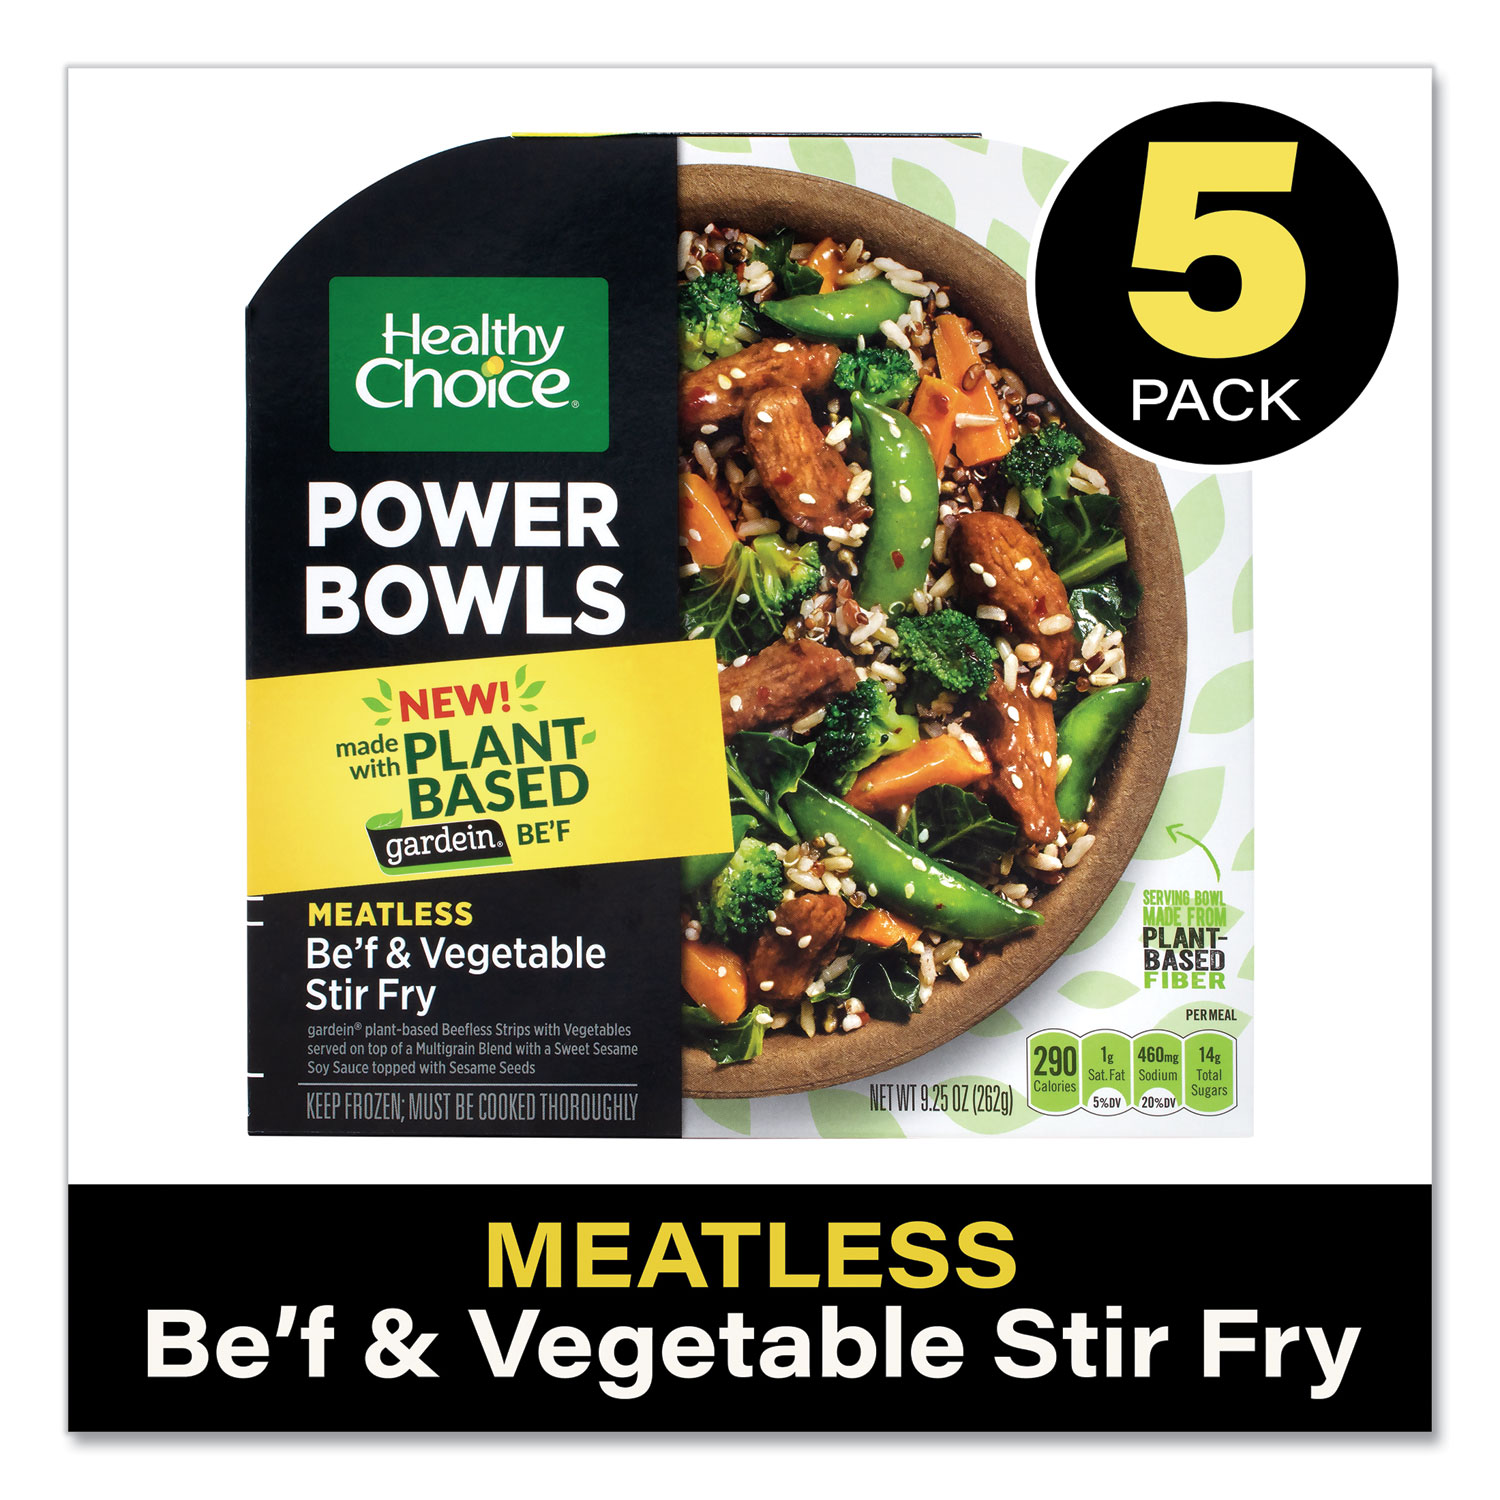  Healthy Choice 7265522117 Power Bowl Gardein Beef and Vegetable Stir Fry, 9.25 oz Bowl, 5/Pack, Free Delivery in 1-4 Business Days (GRR90300170) 